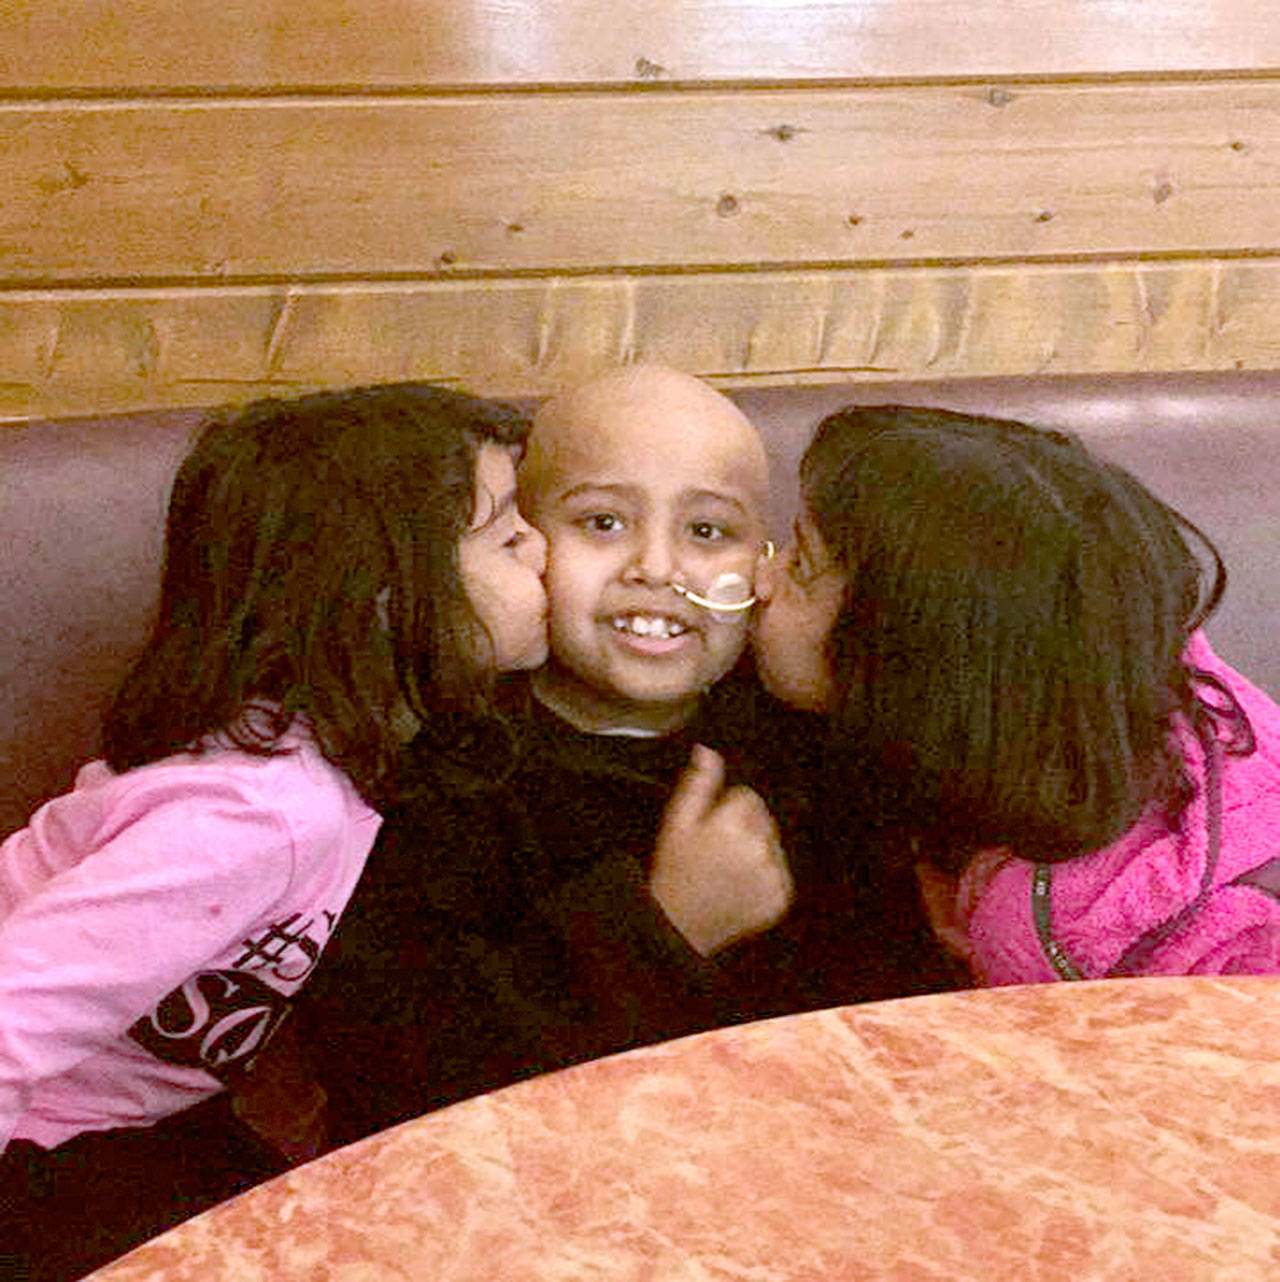 Sisters Kendra and Kimberly give their brother, Orlando, a kiss on the cheek. (Ireni Ramos)